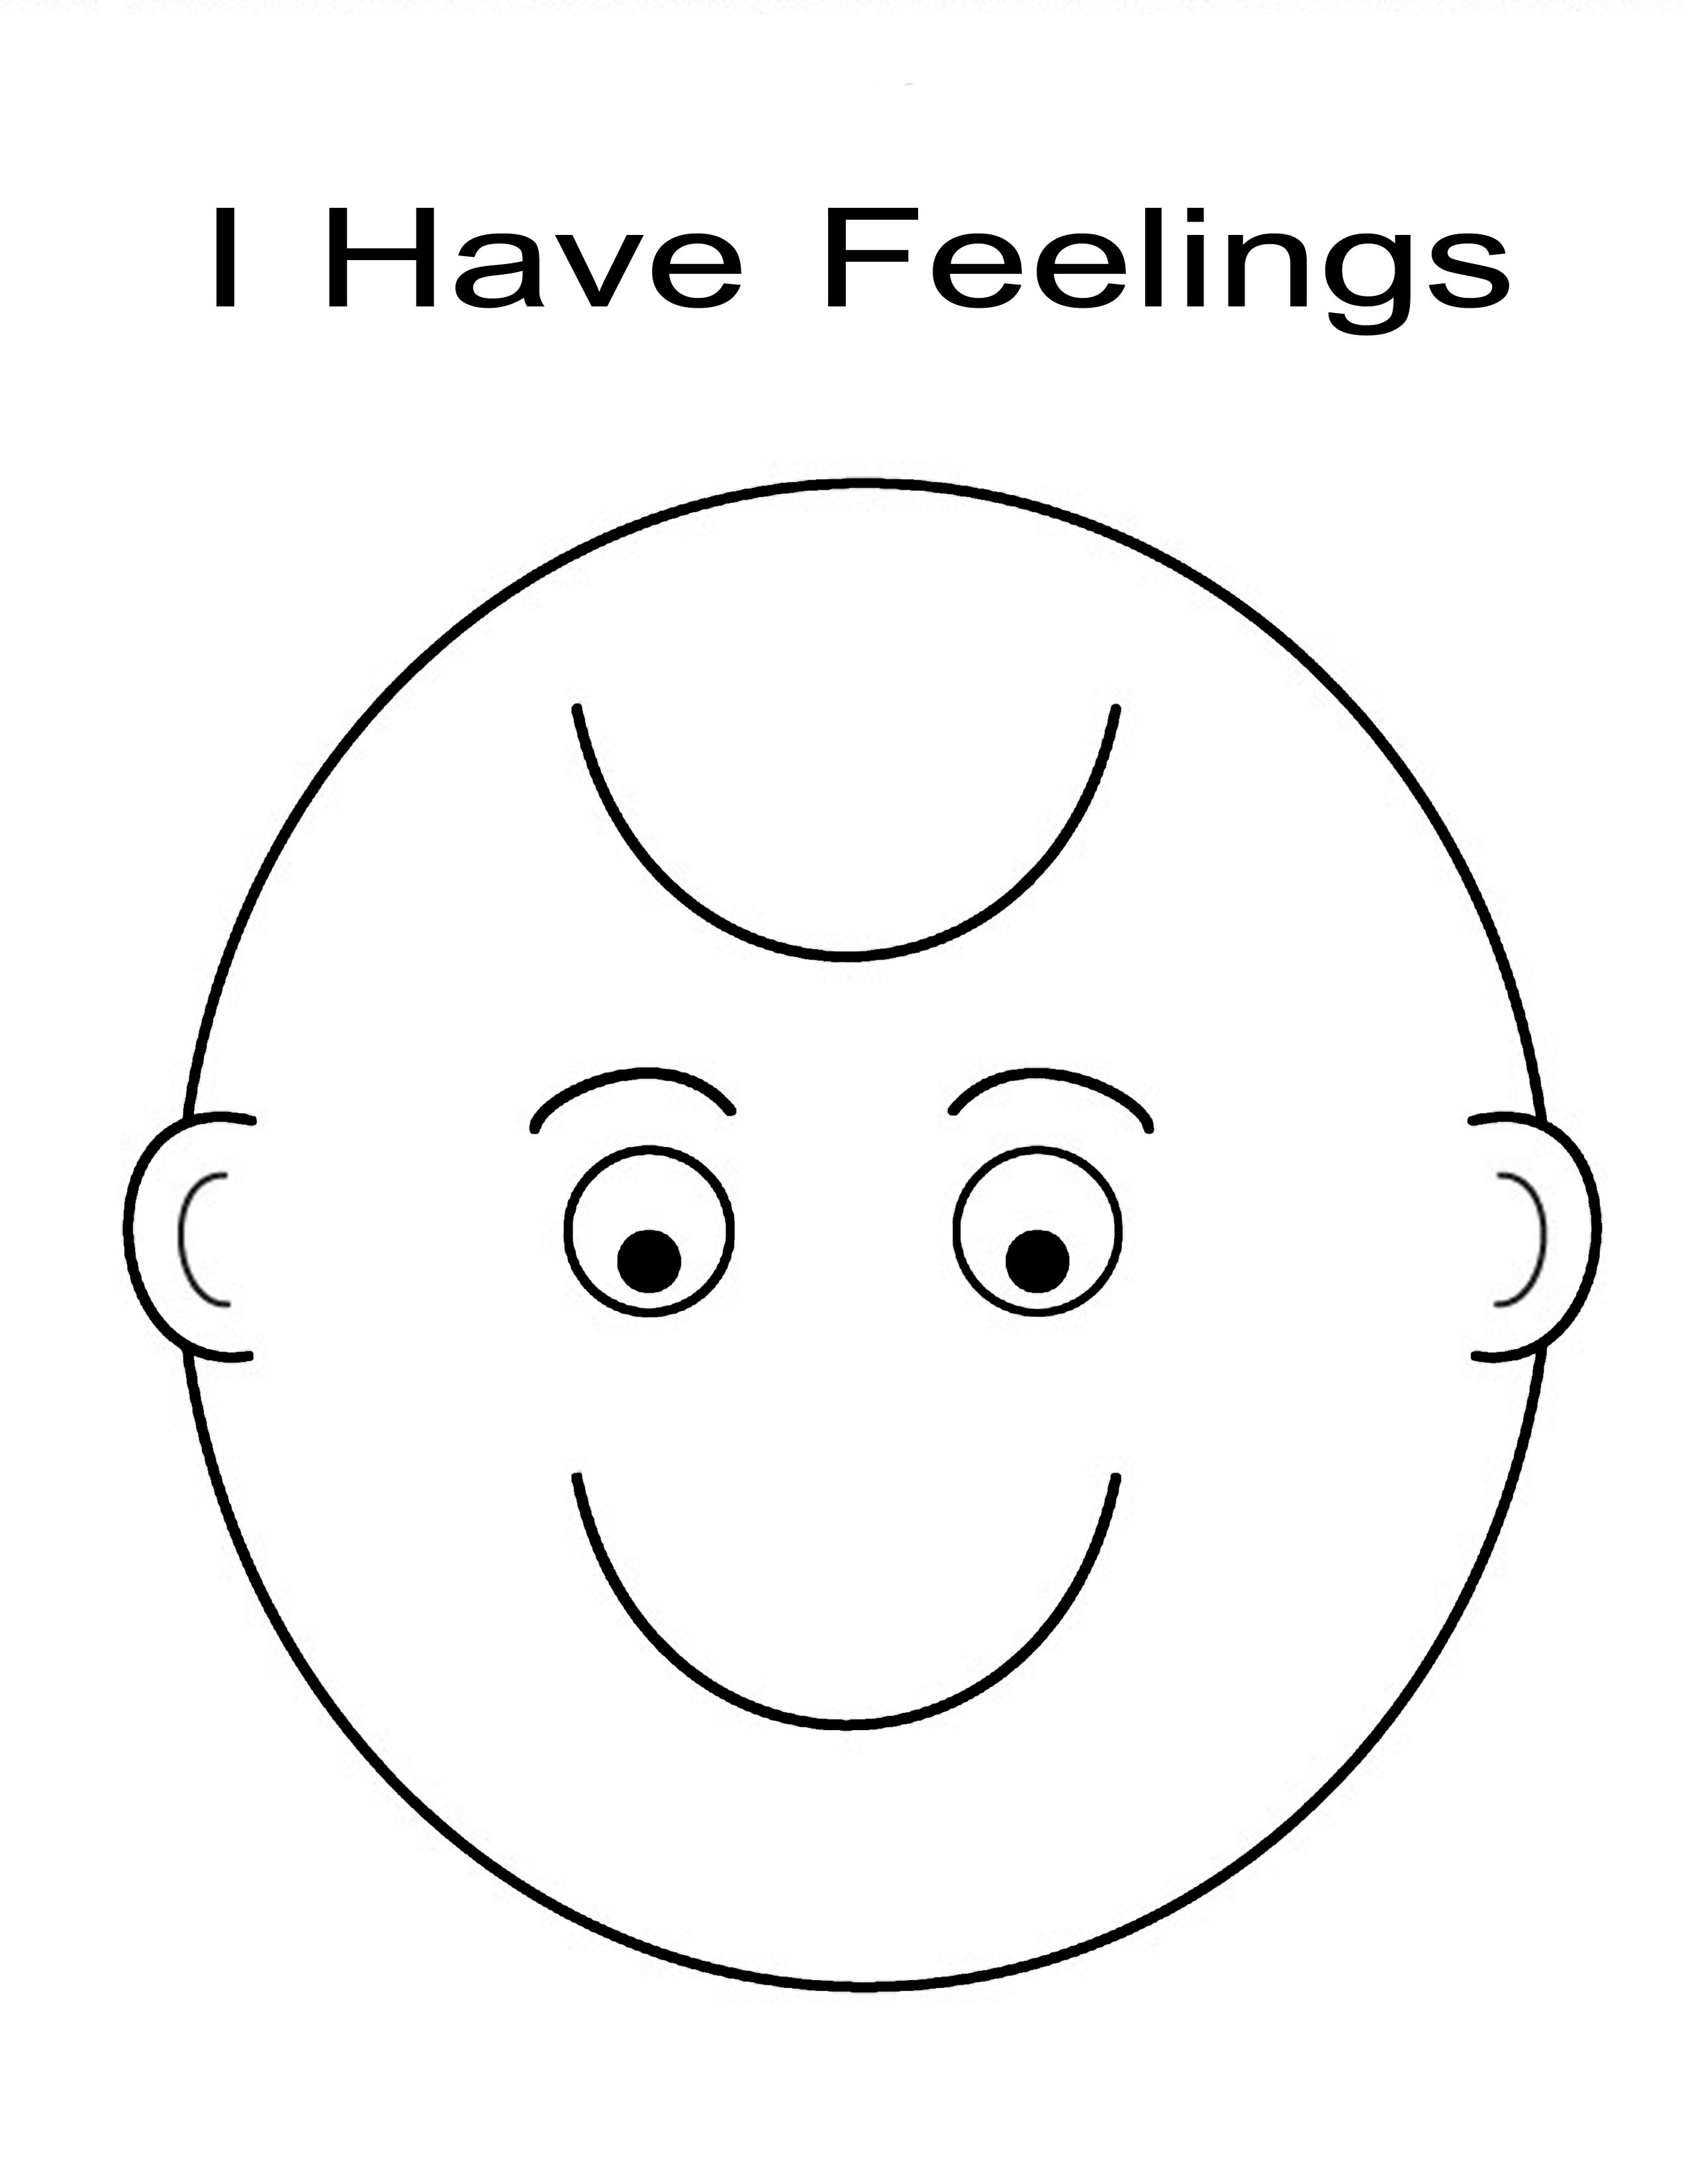 Feelings Coloring Pages Printable Free - Printable Templates